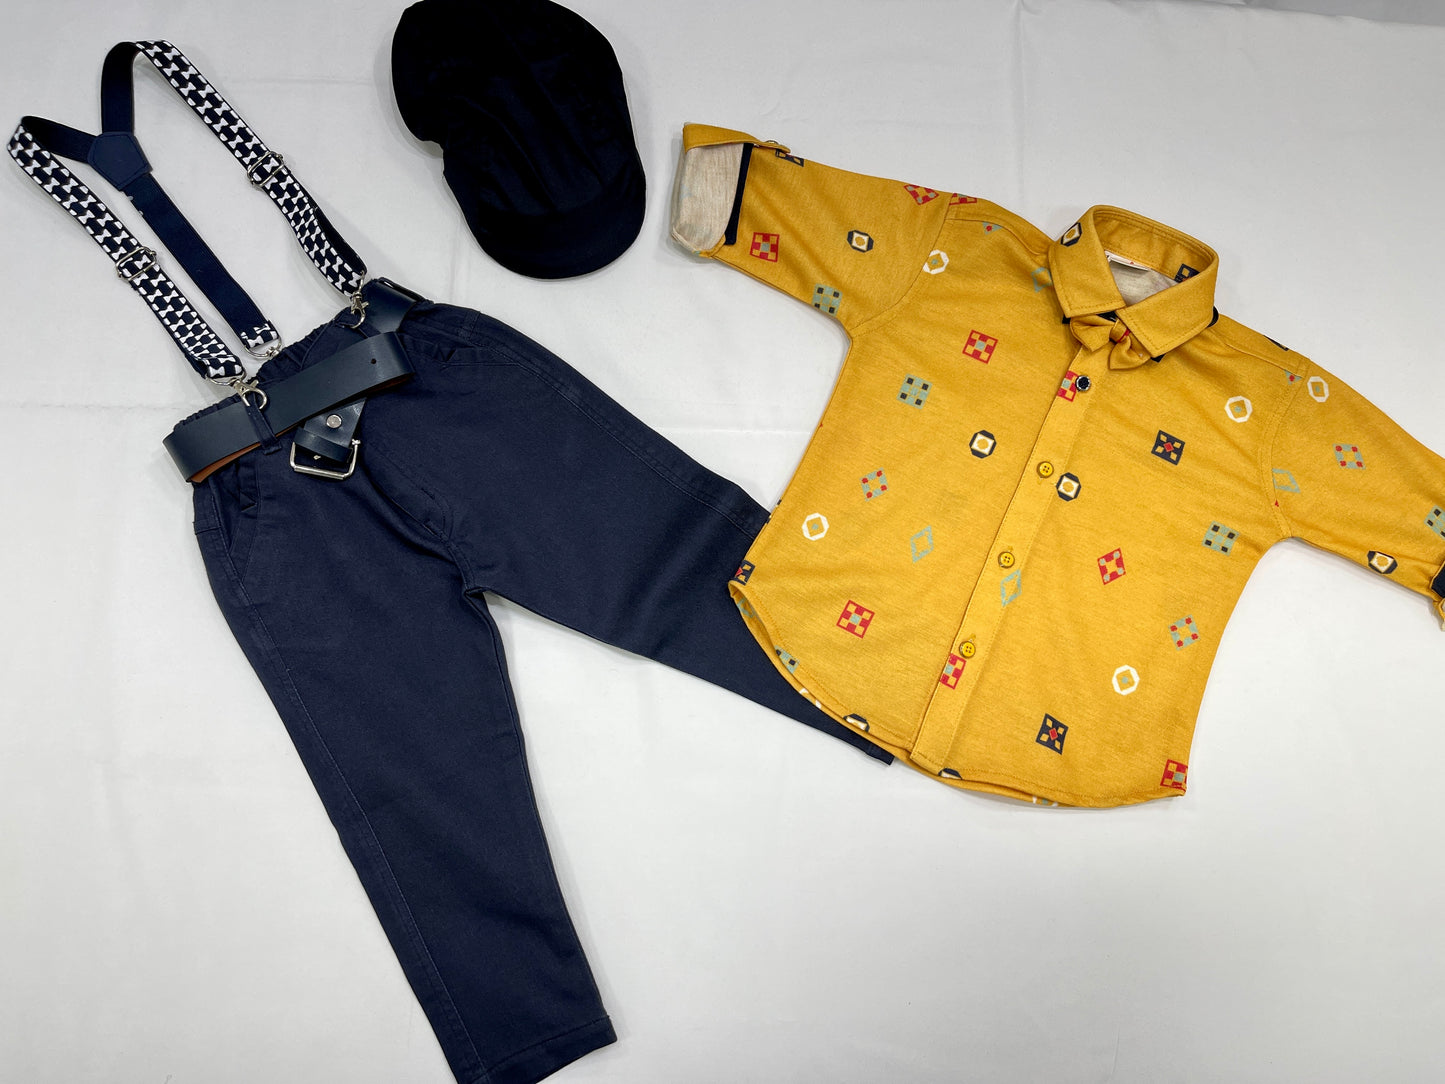 Mustard Self Design Shirt with Navy Blue Pants Boys Set with stylish hat, bow-tie and suspenders